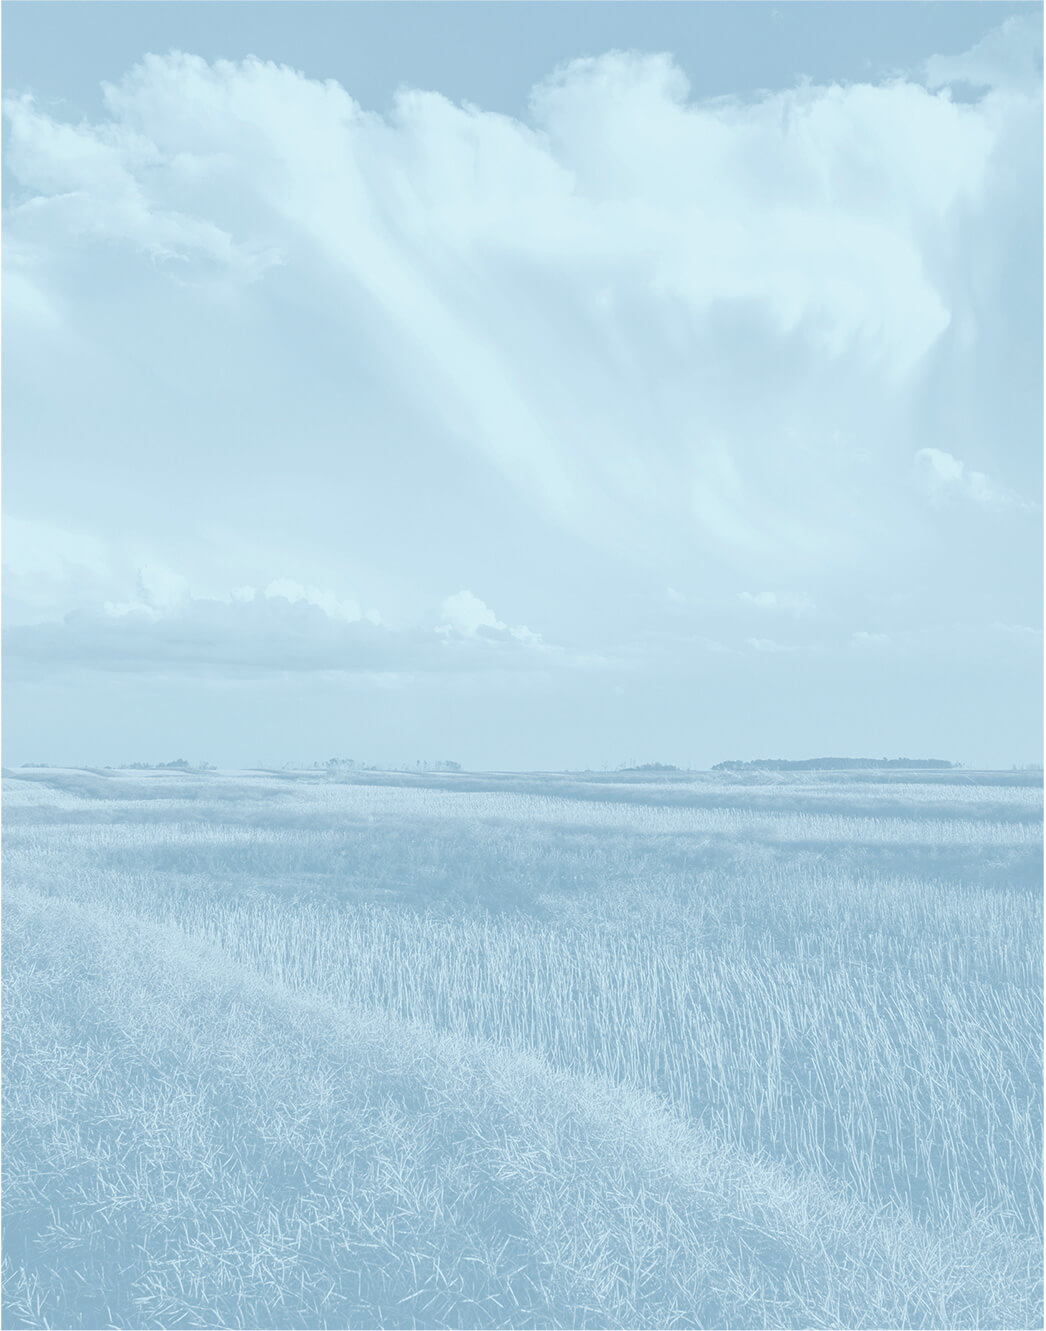 Calming Crop Field Landscape with Blue Overlay